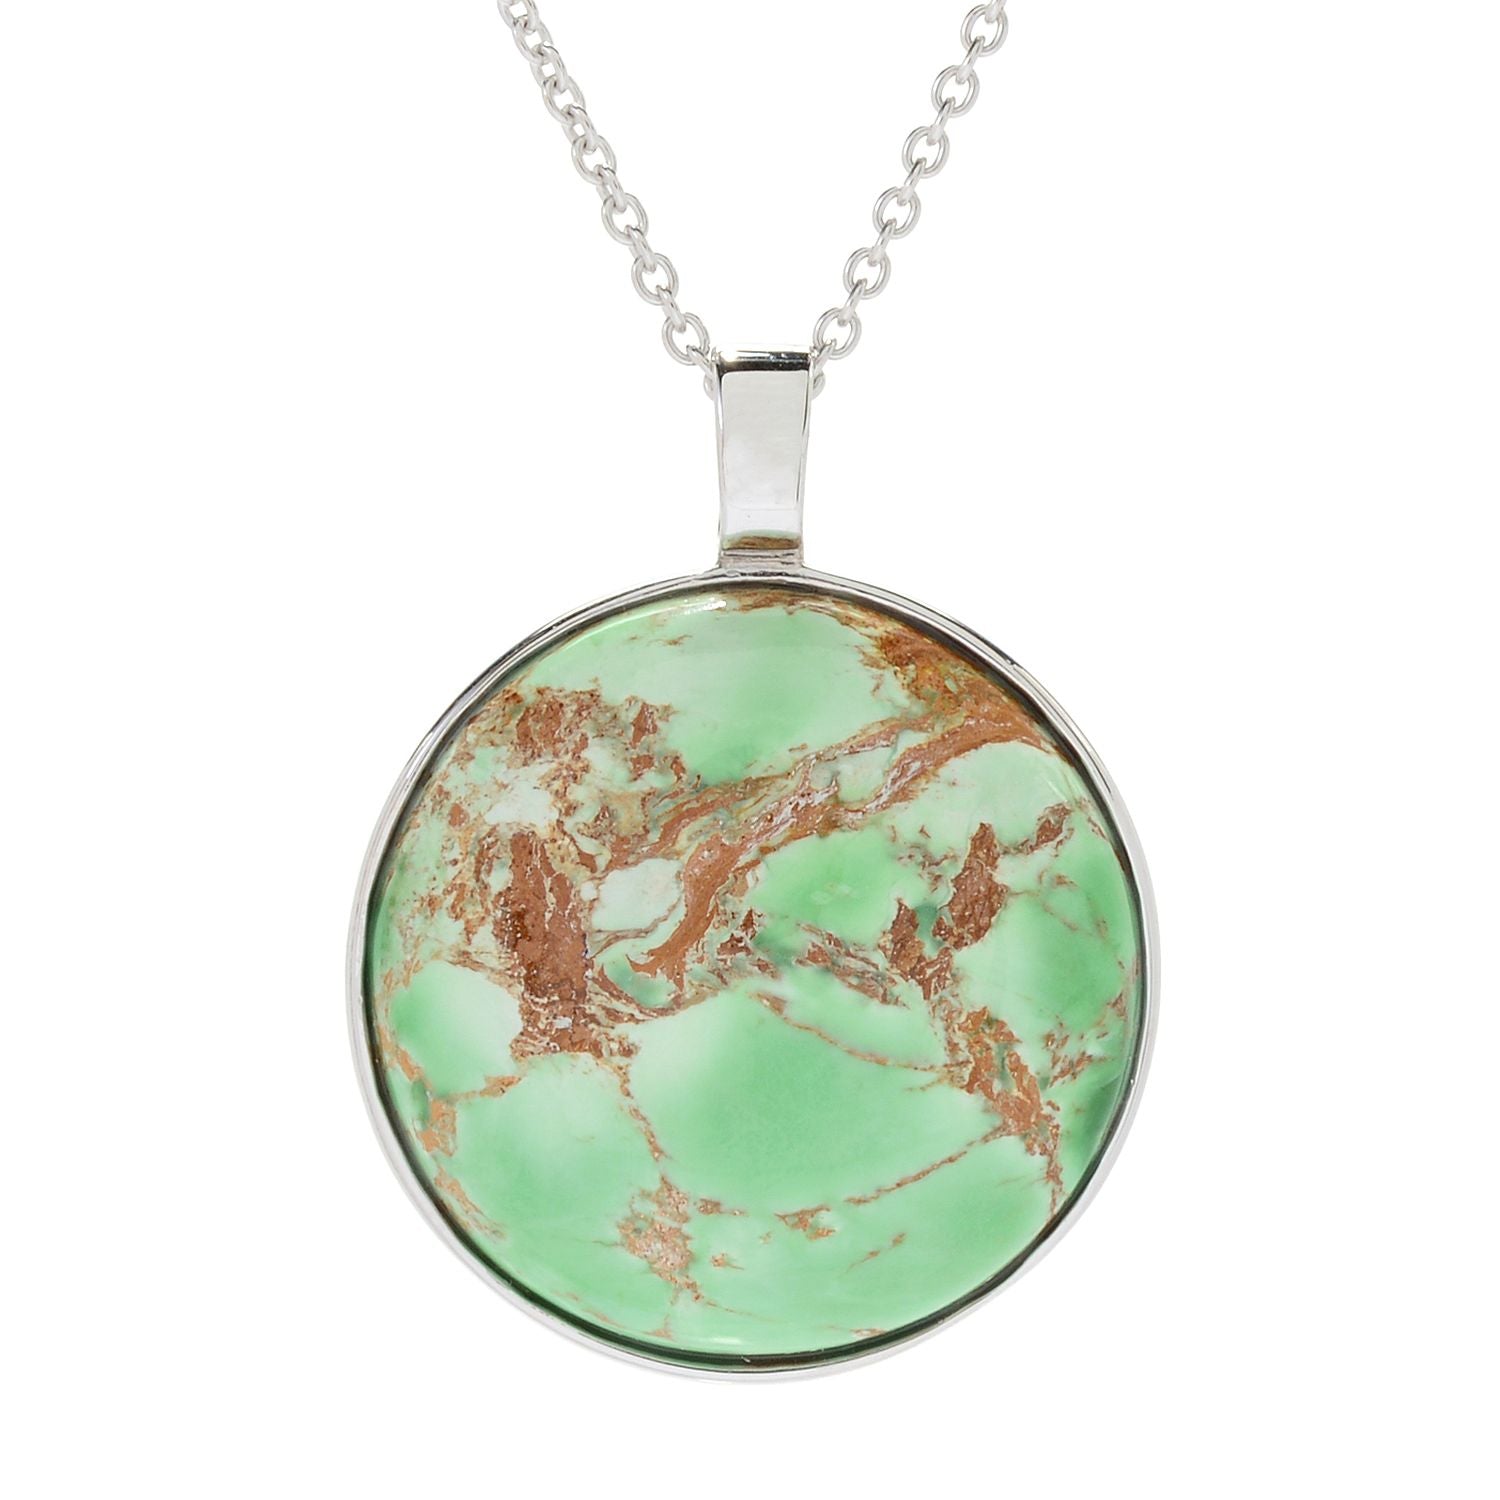 Pinctore Sterling Silver 24mm Round Variscite Pendant w/ 18" Cable Chain - pinctore